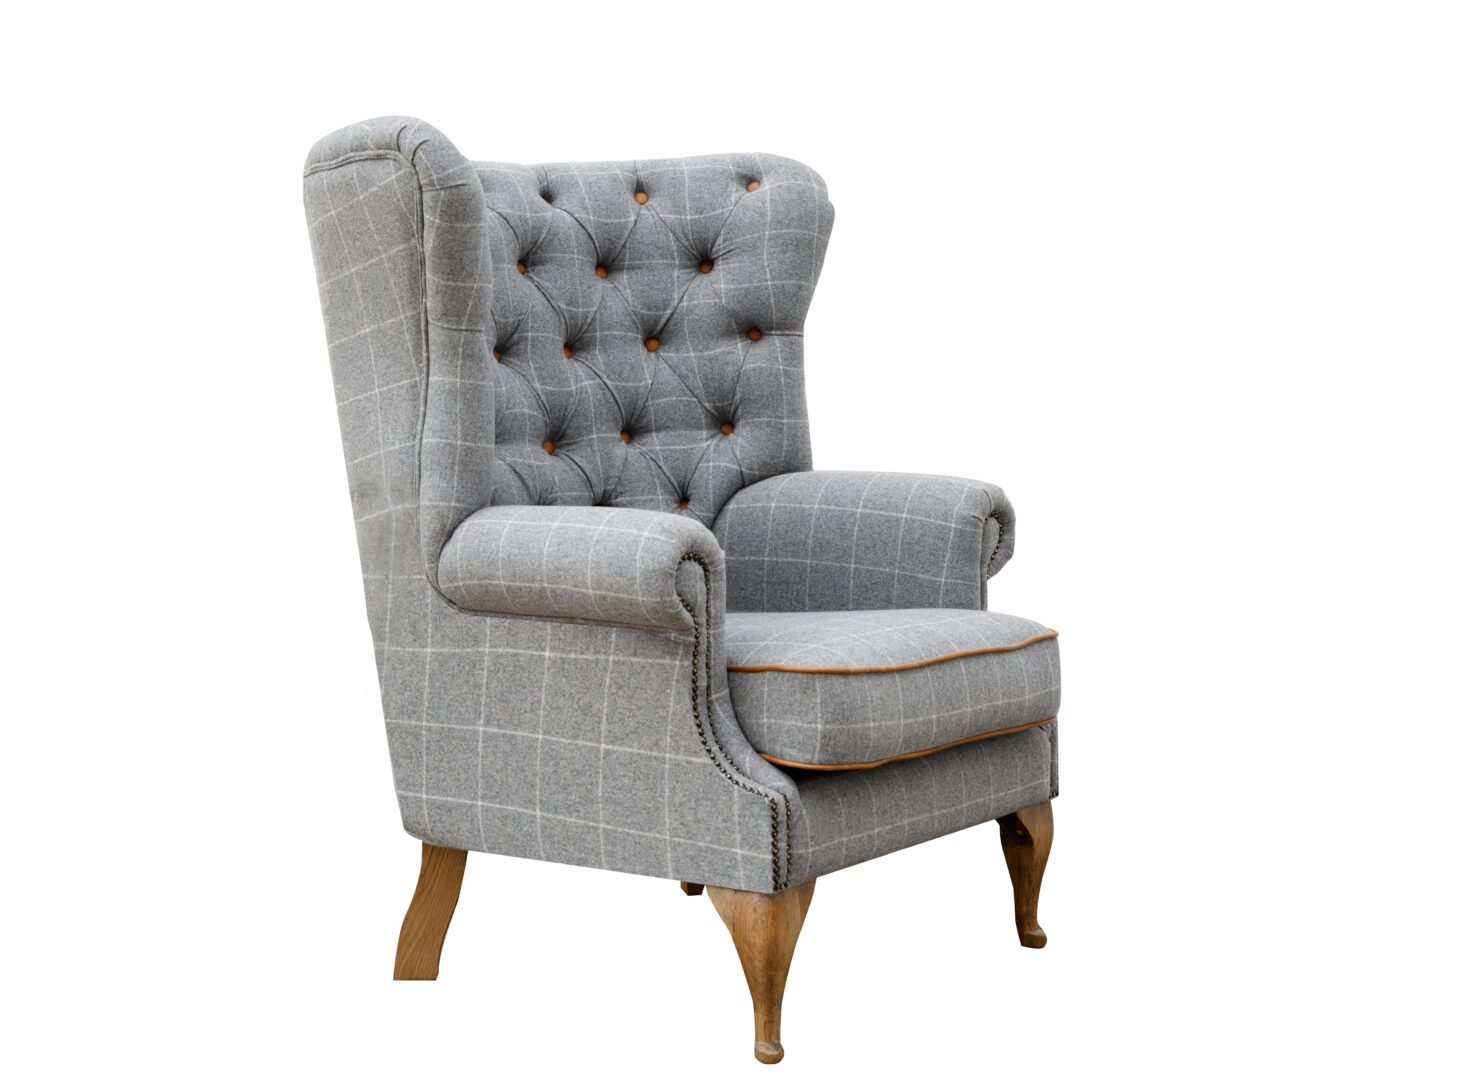 Gaso Grey Upholstered Button Back Wing Chair In Check Grey.